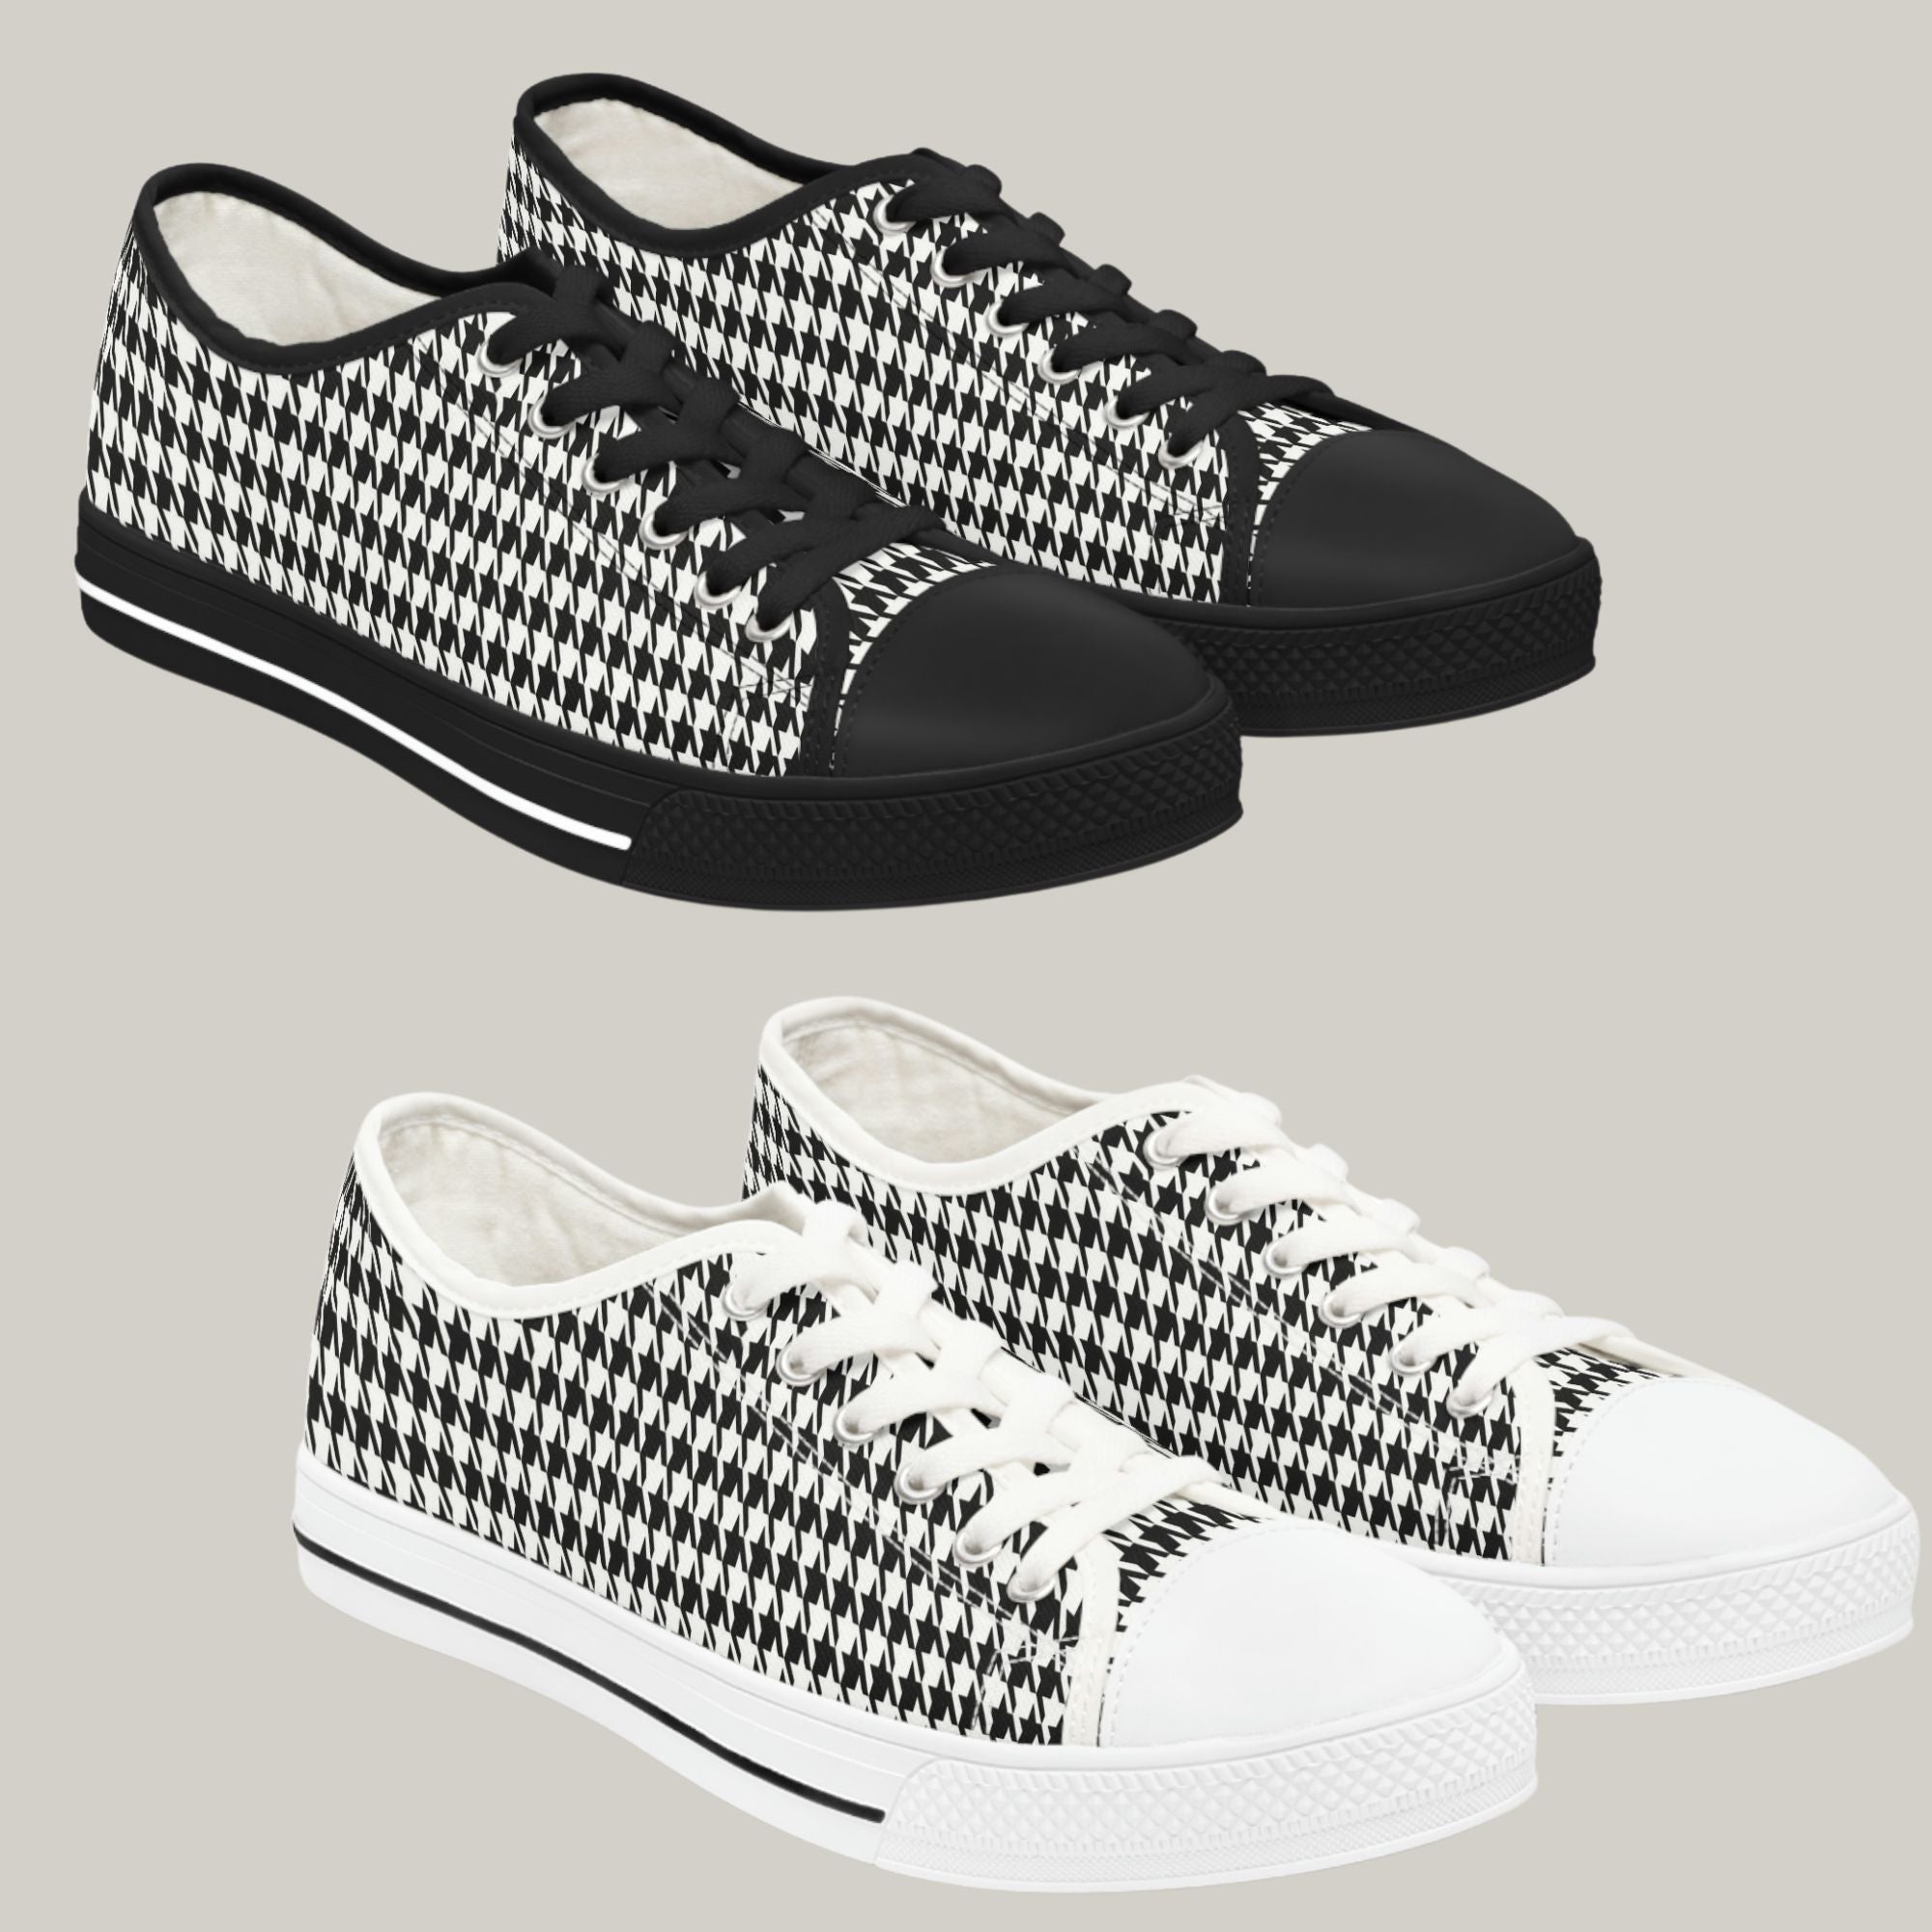 CLASSIC HOUNDSTOOTH - Women's Low Top Sneakers Black and White